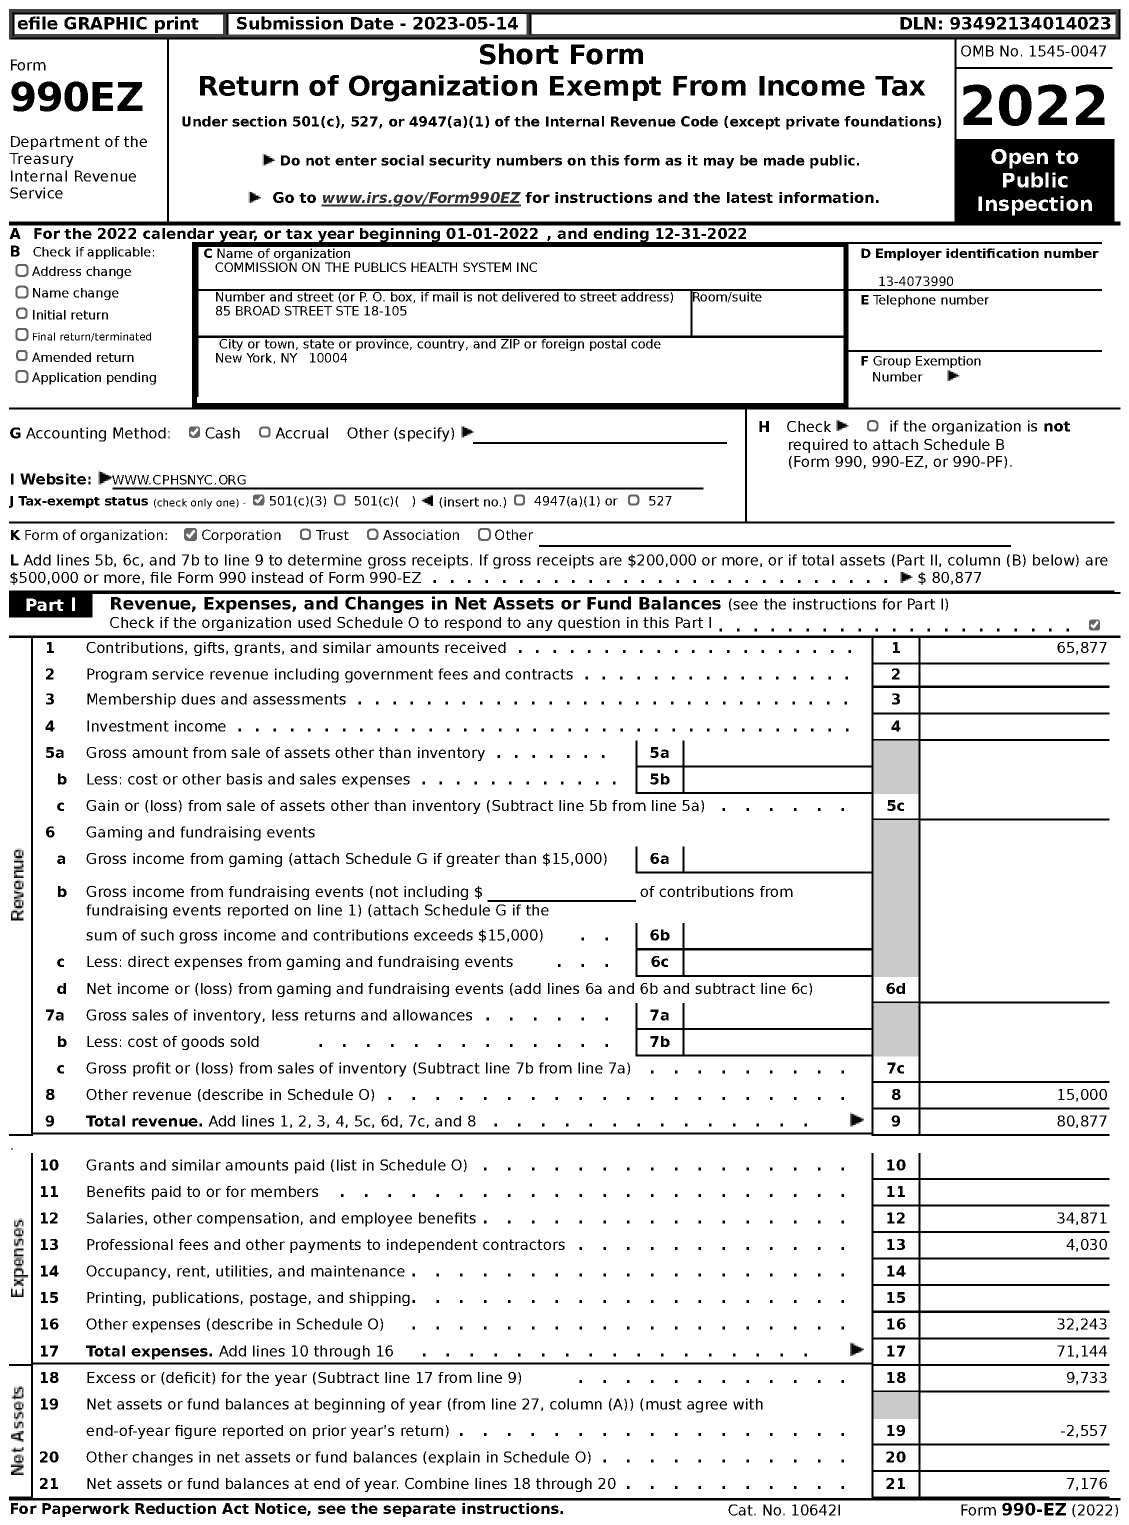 Image of first page of 2022 Form 990EZ for Commission on the Publics Health System